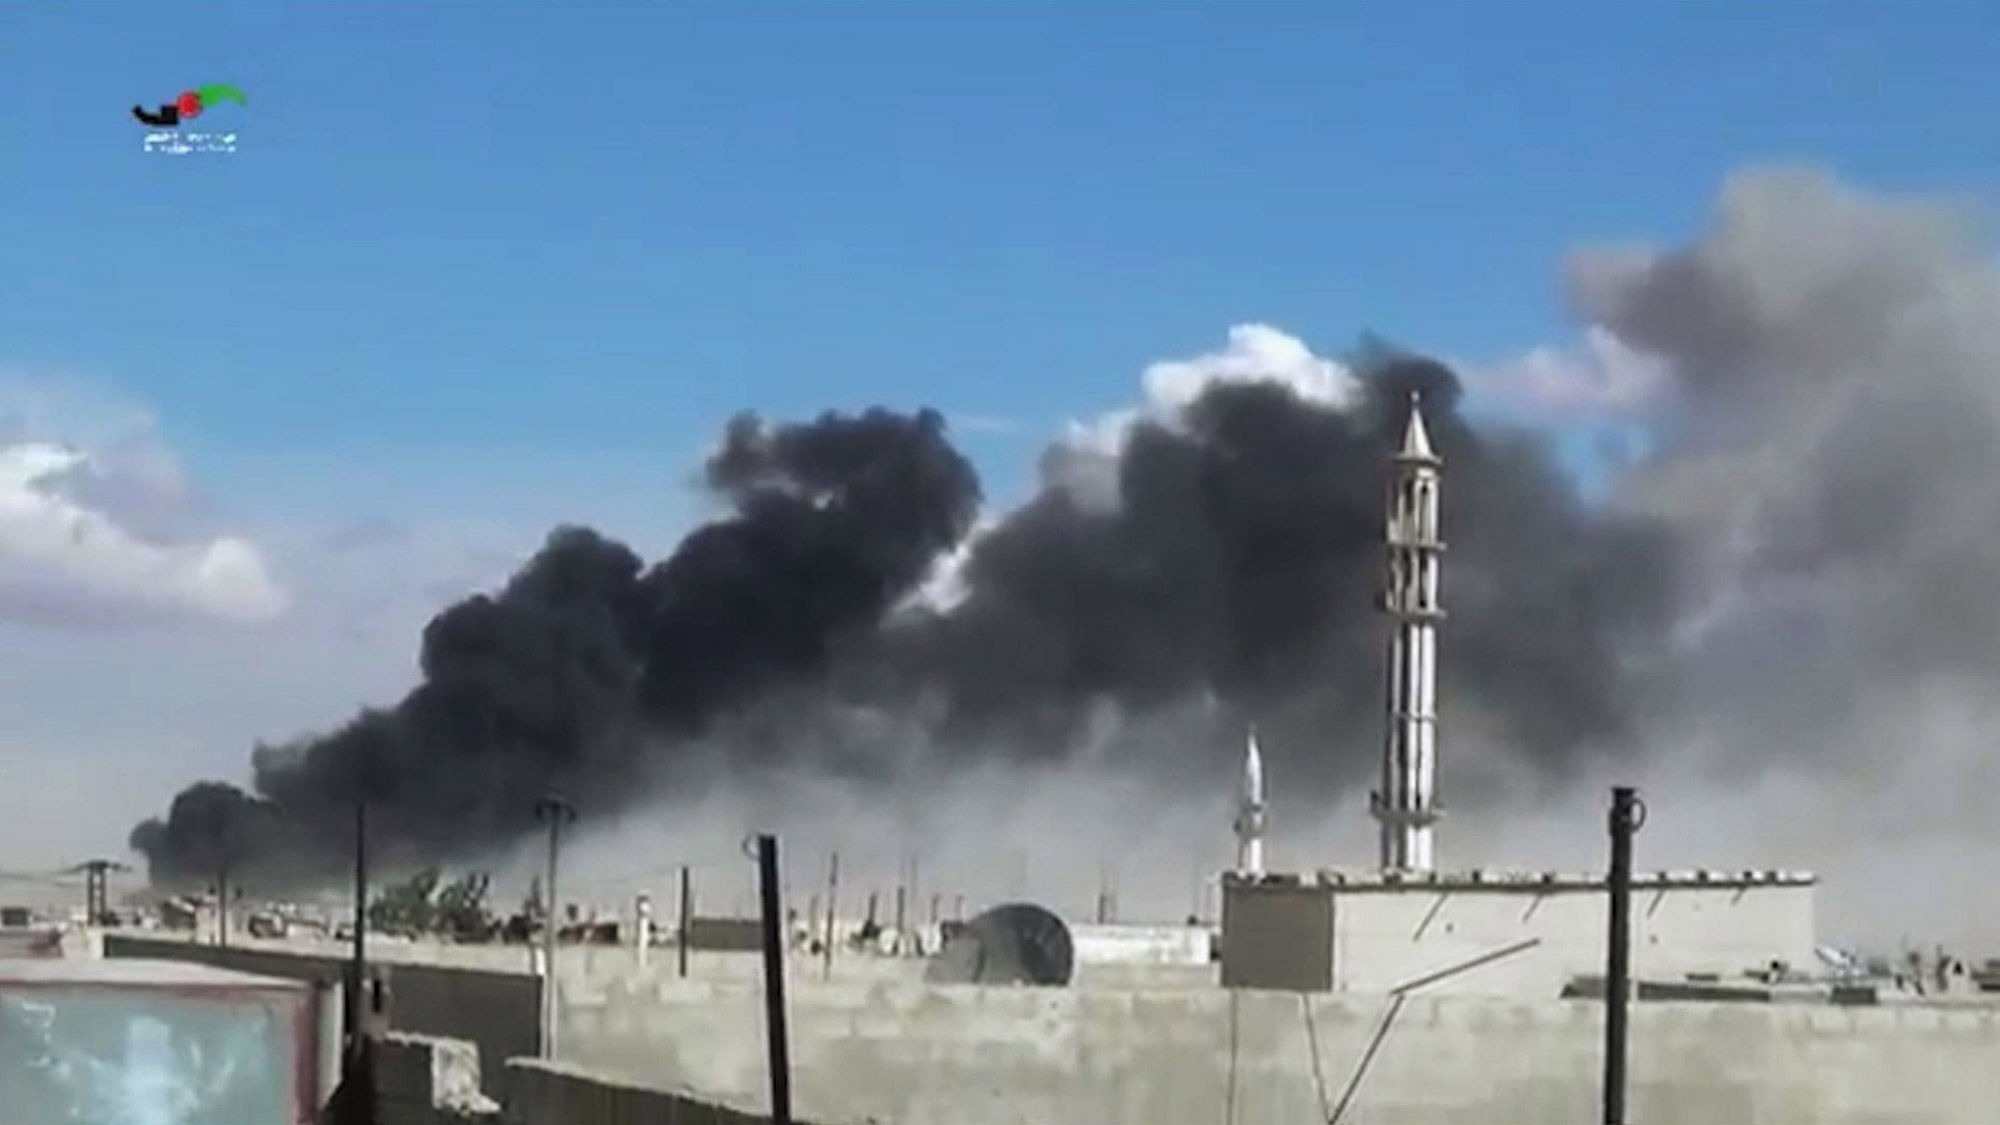 

Smoke rises after airstrikes by military jets in Syria. (Photo: AP)